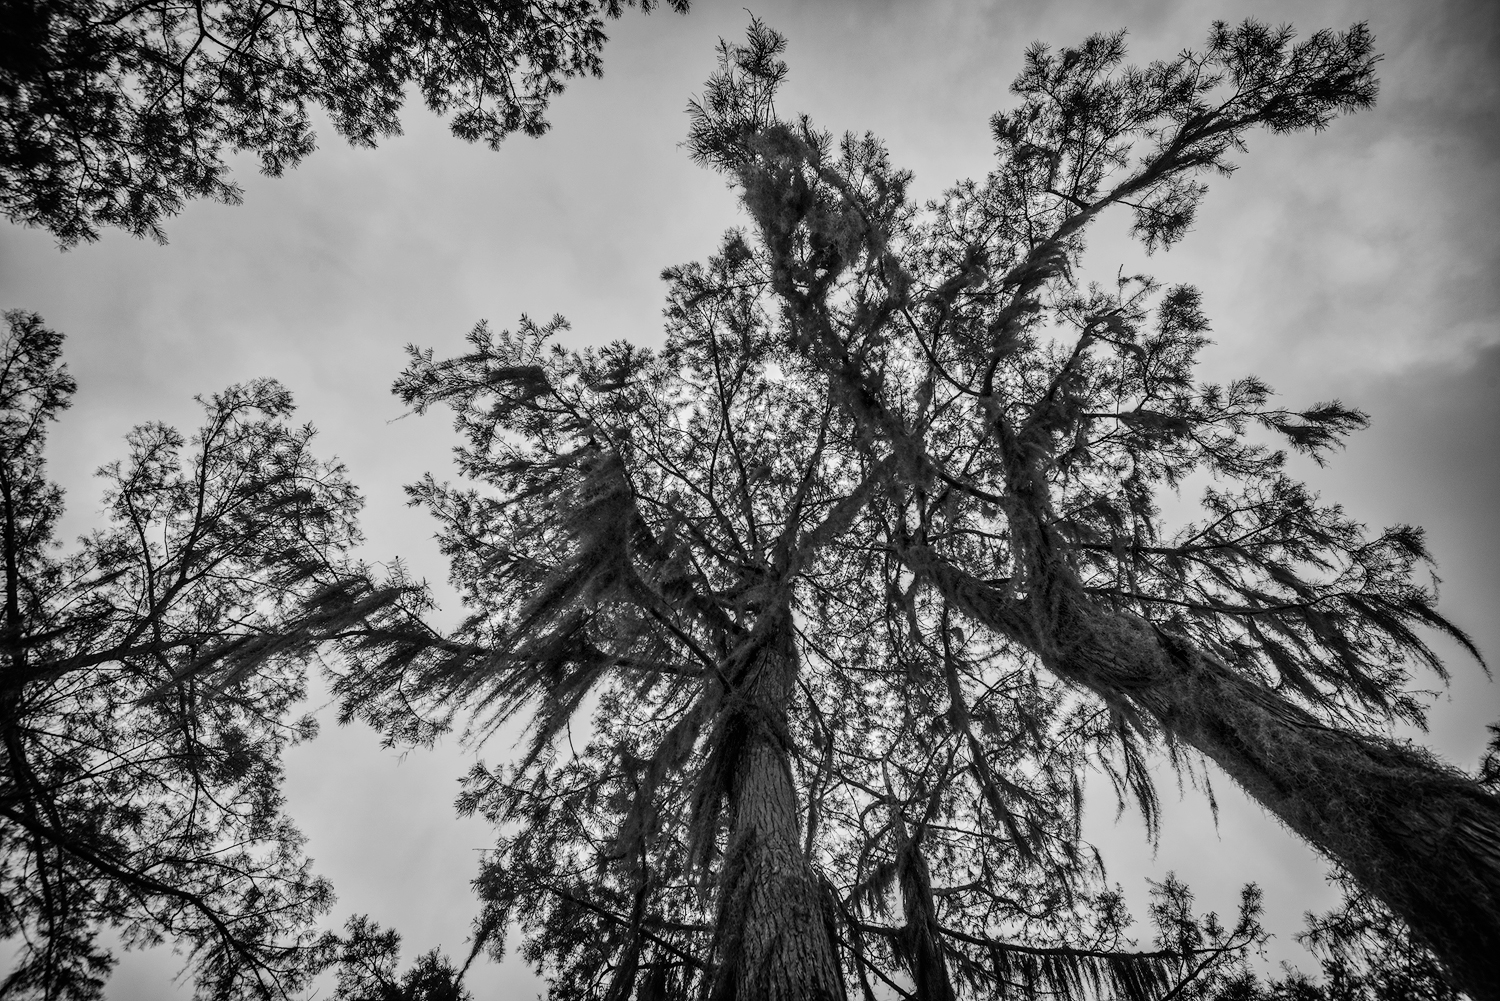 A Cloudy day in the Atchafalaya Basin